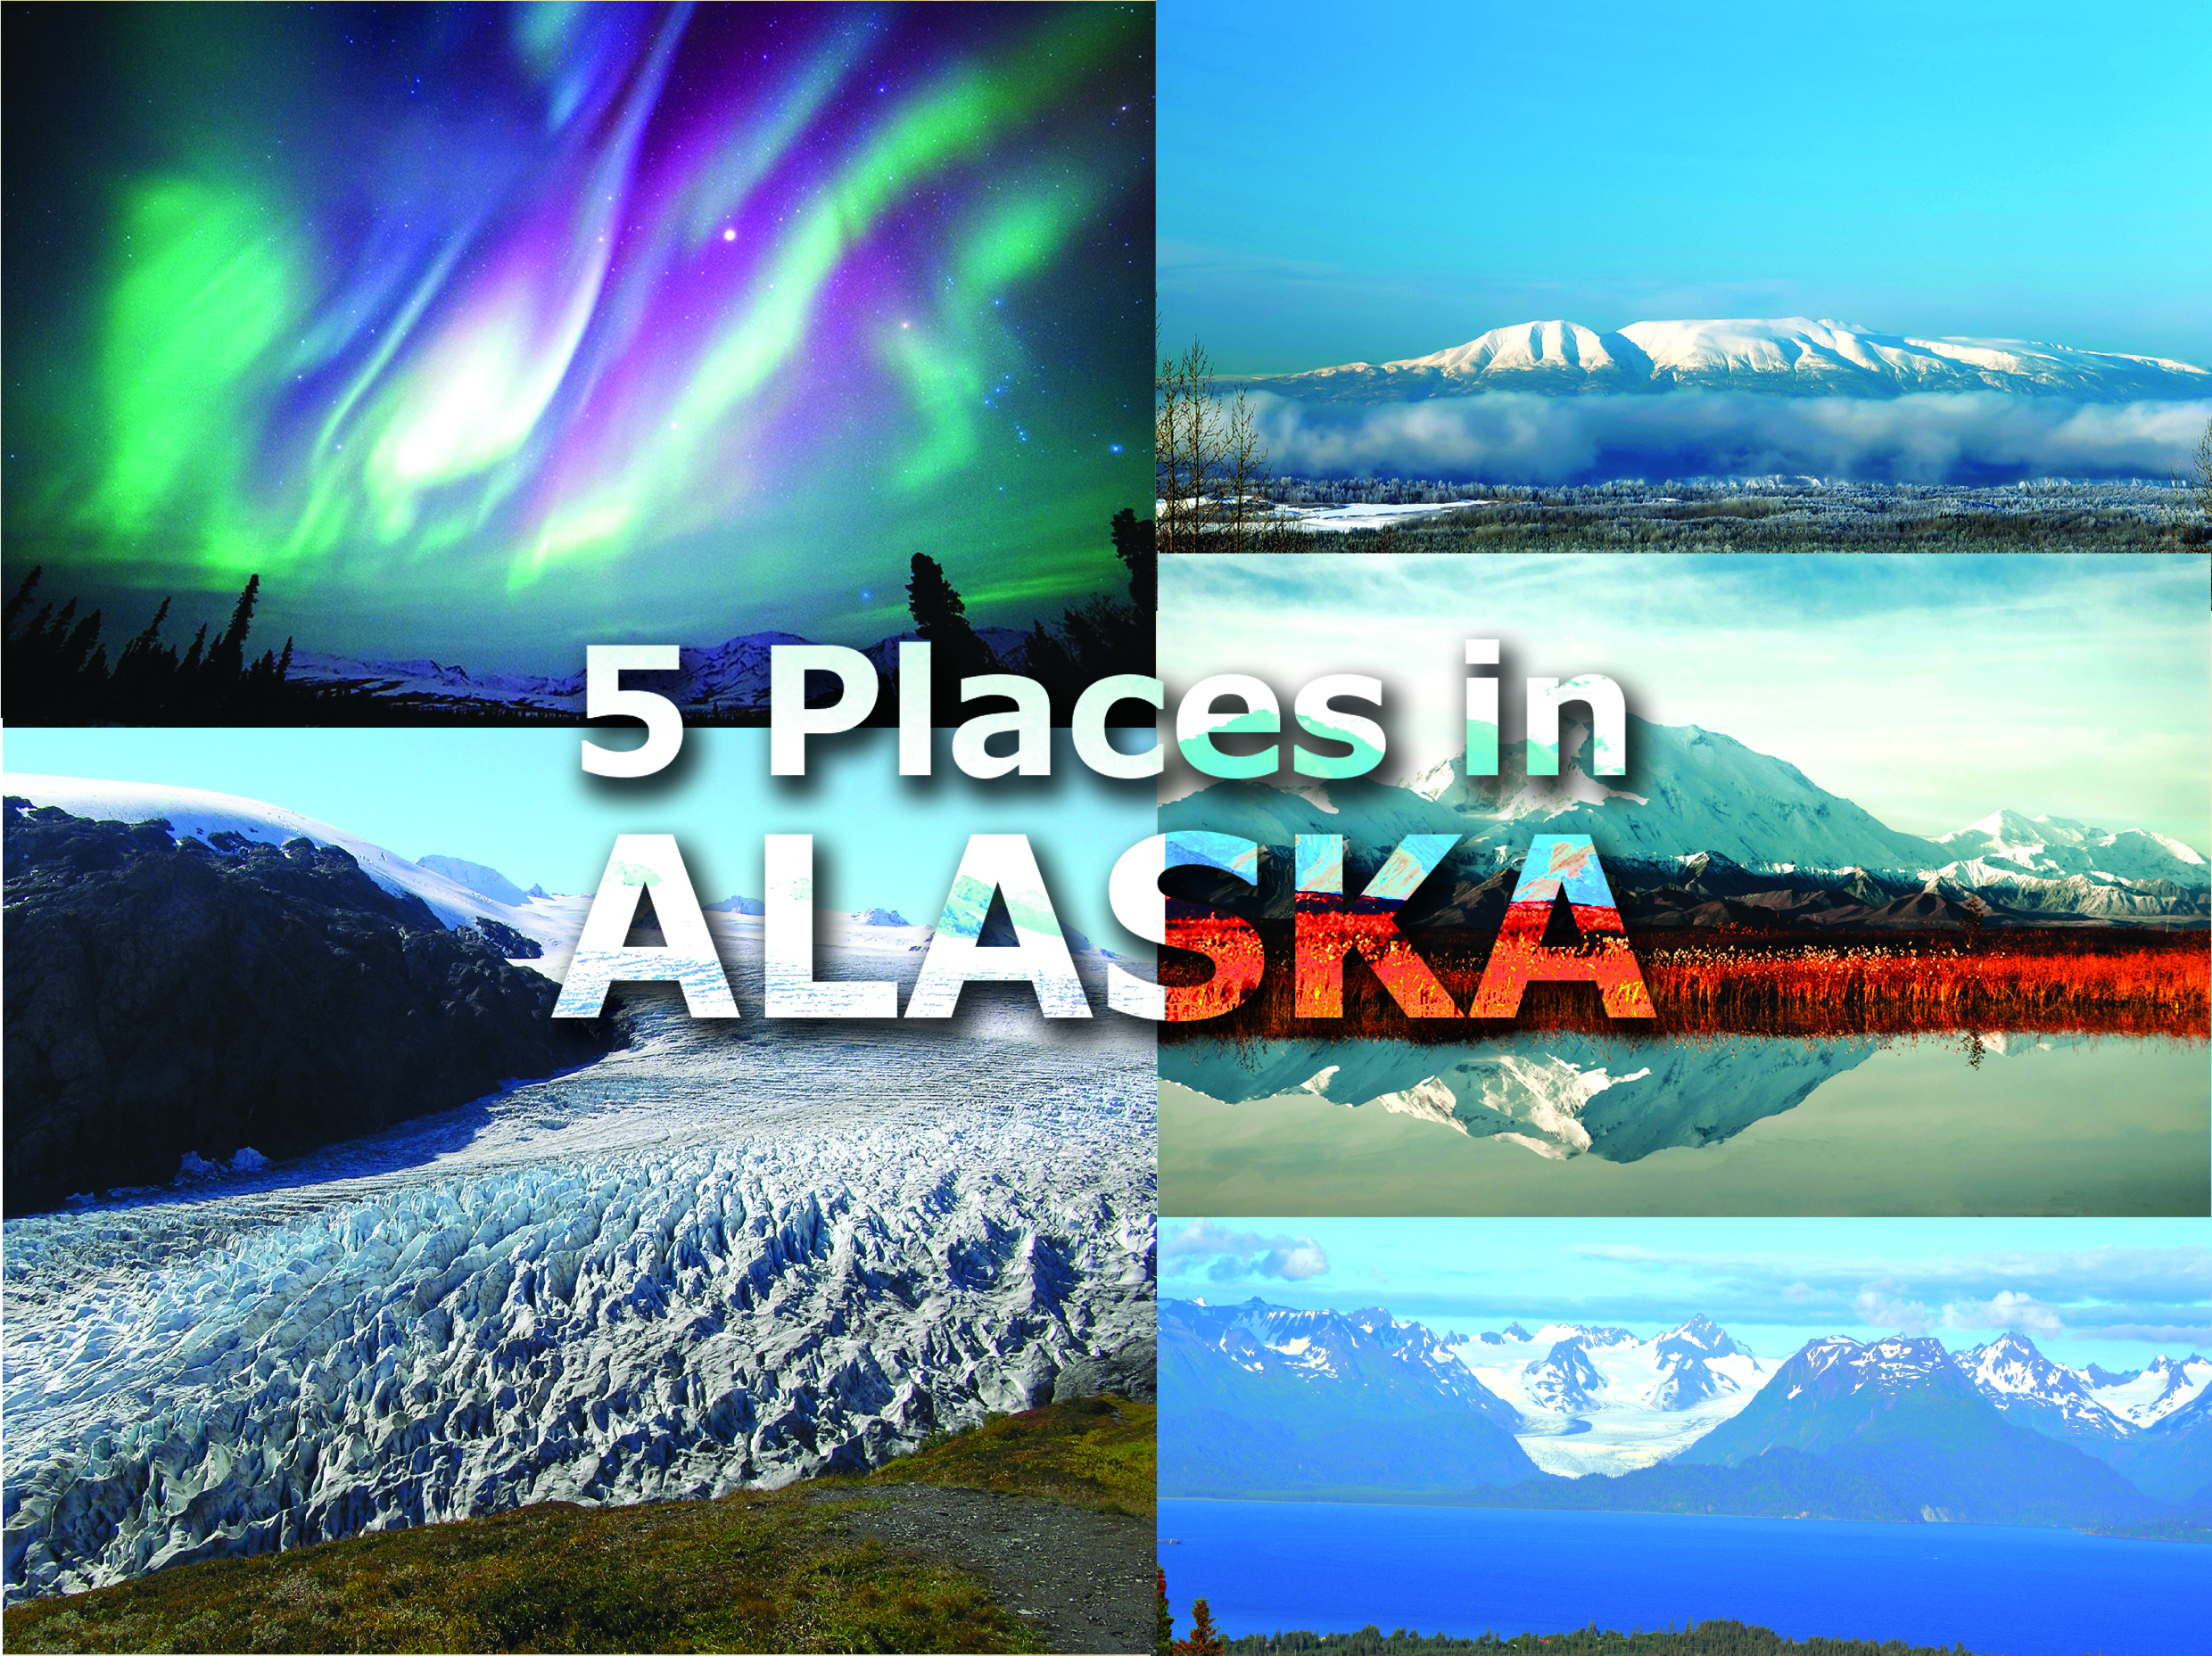 5 Places in Alaska to Visit